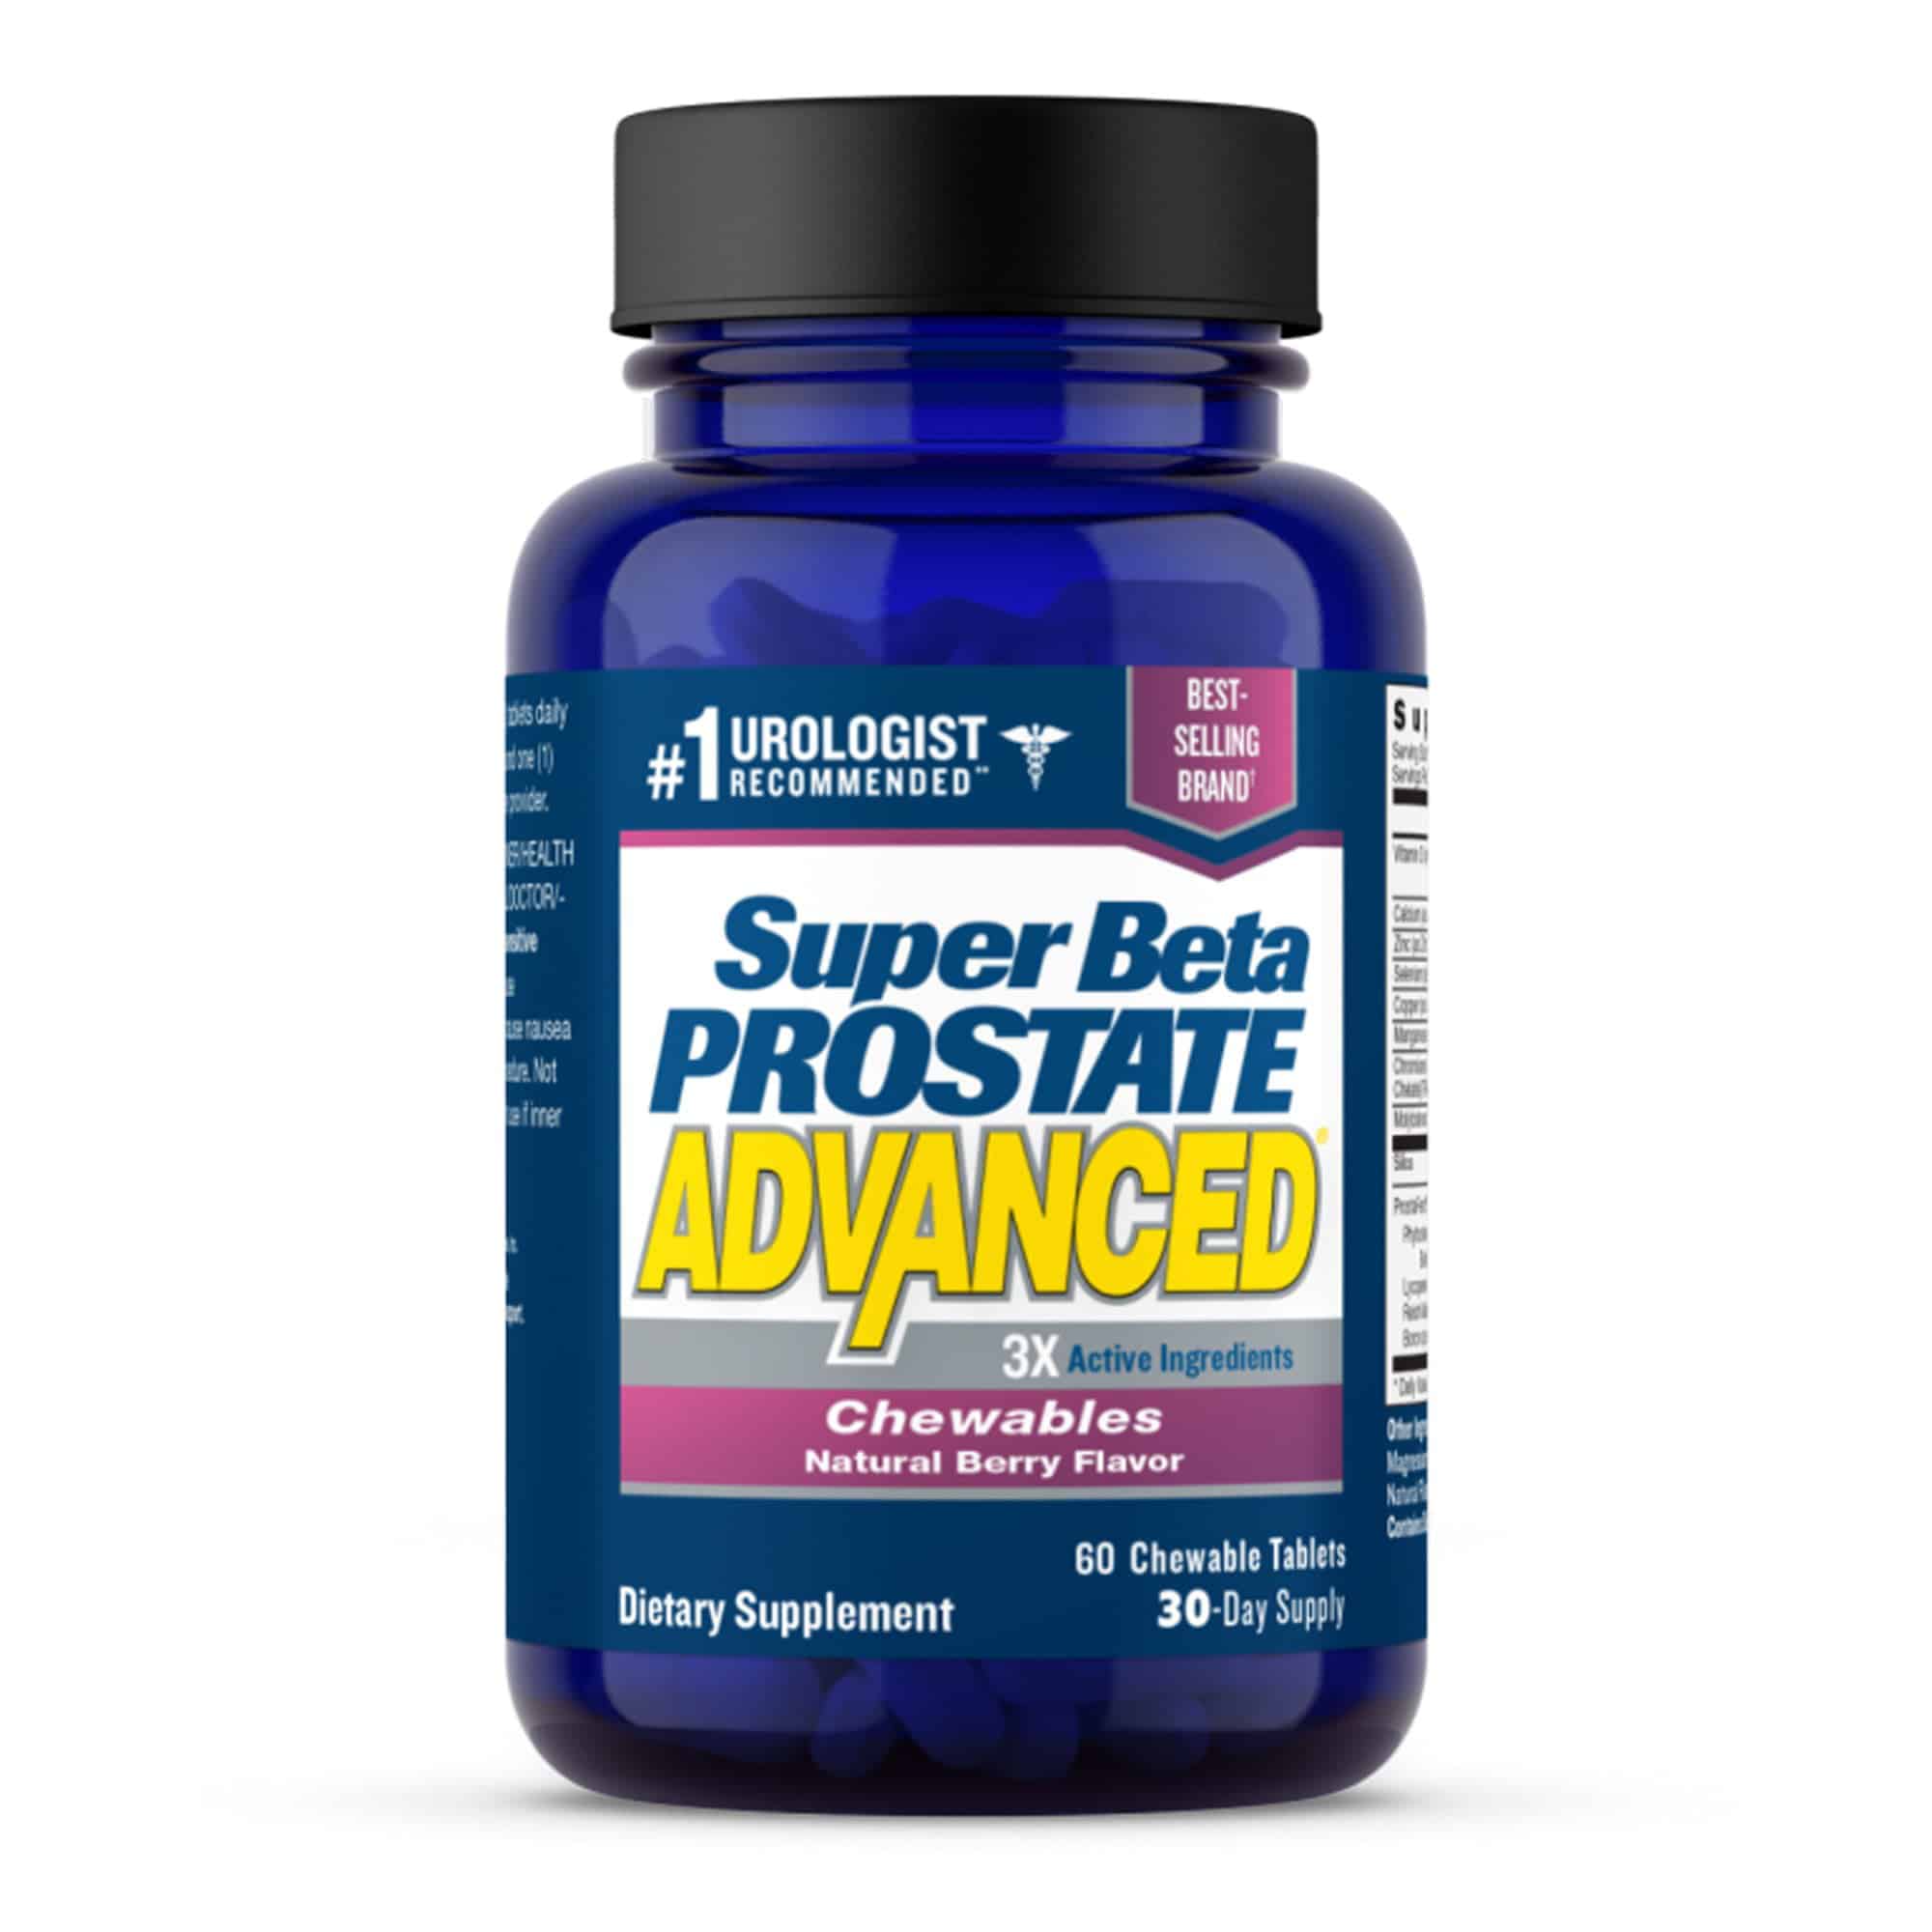 Super Beta Prostate Advanced Chewables Natural Berry